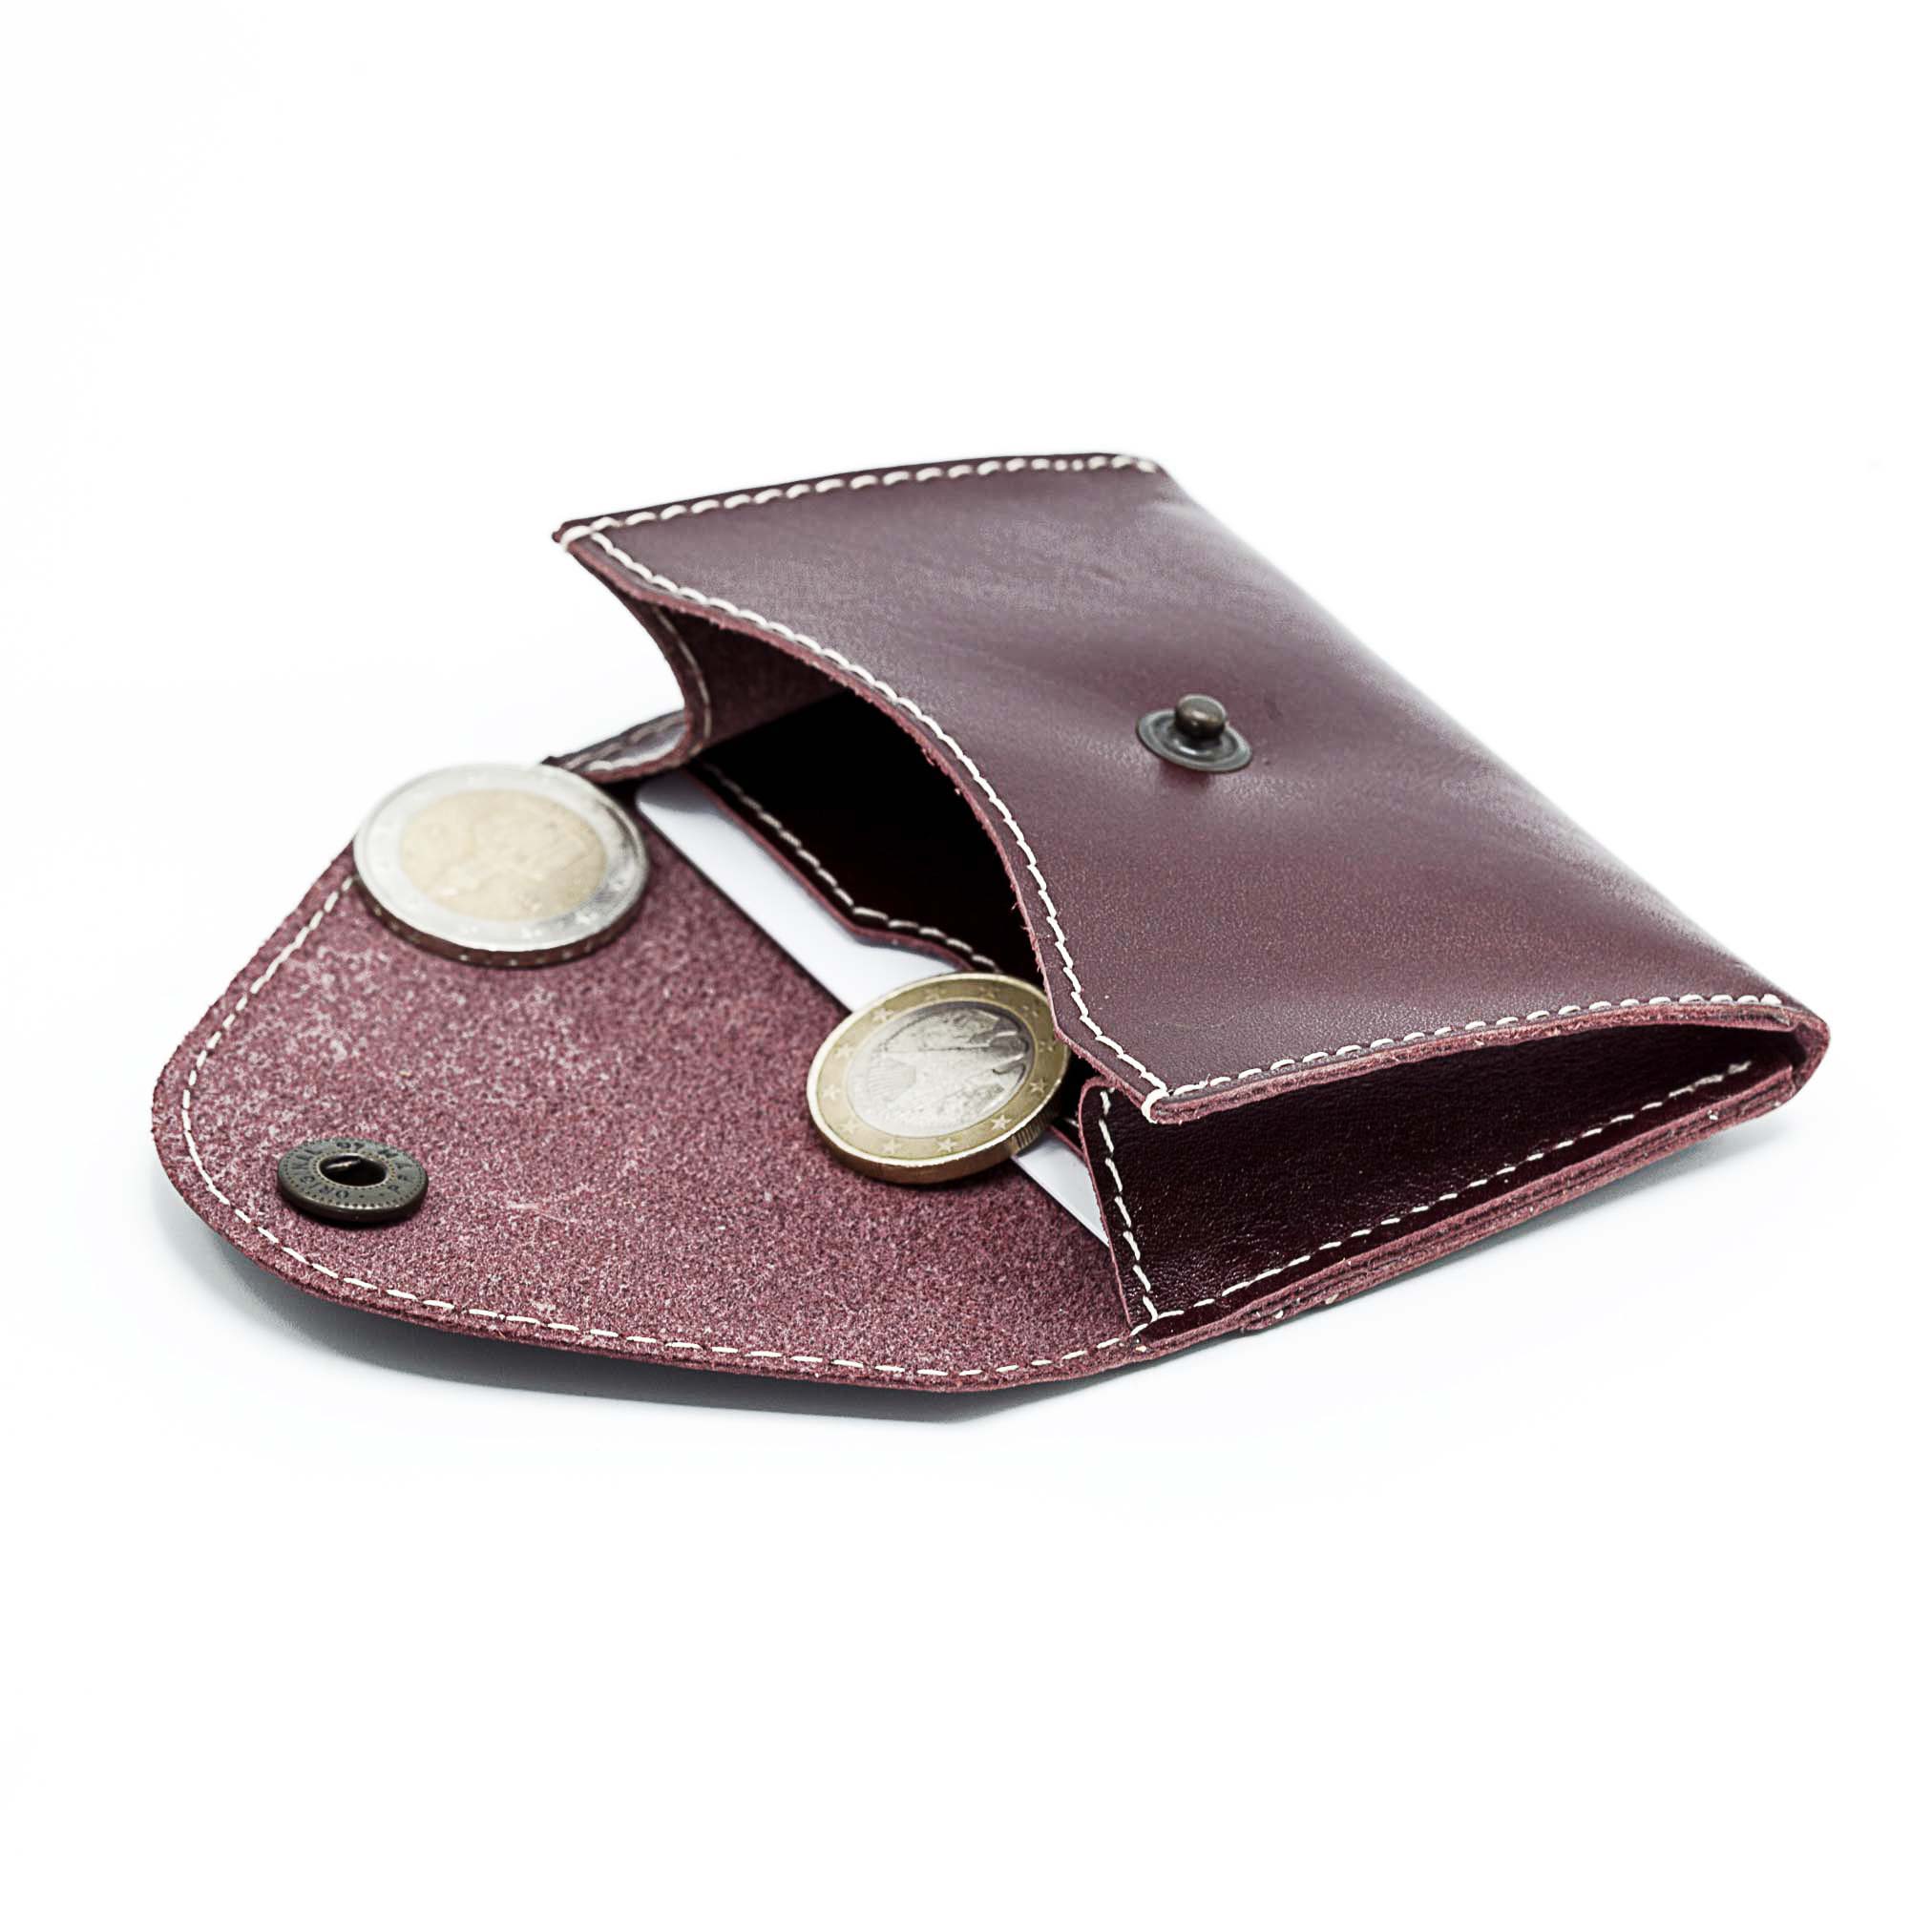 Leather Card Holder with a Coin Pocket | Reclaimed Leather 